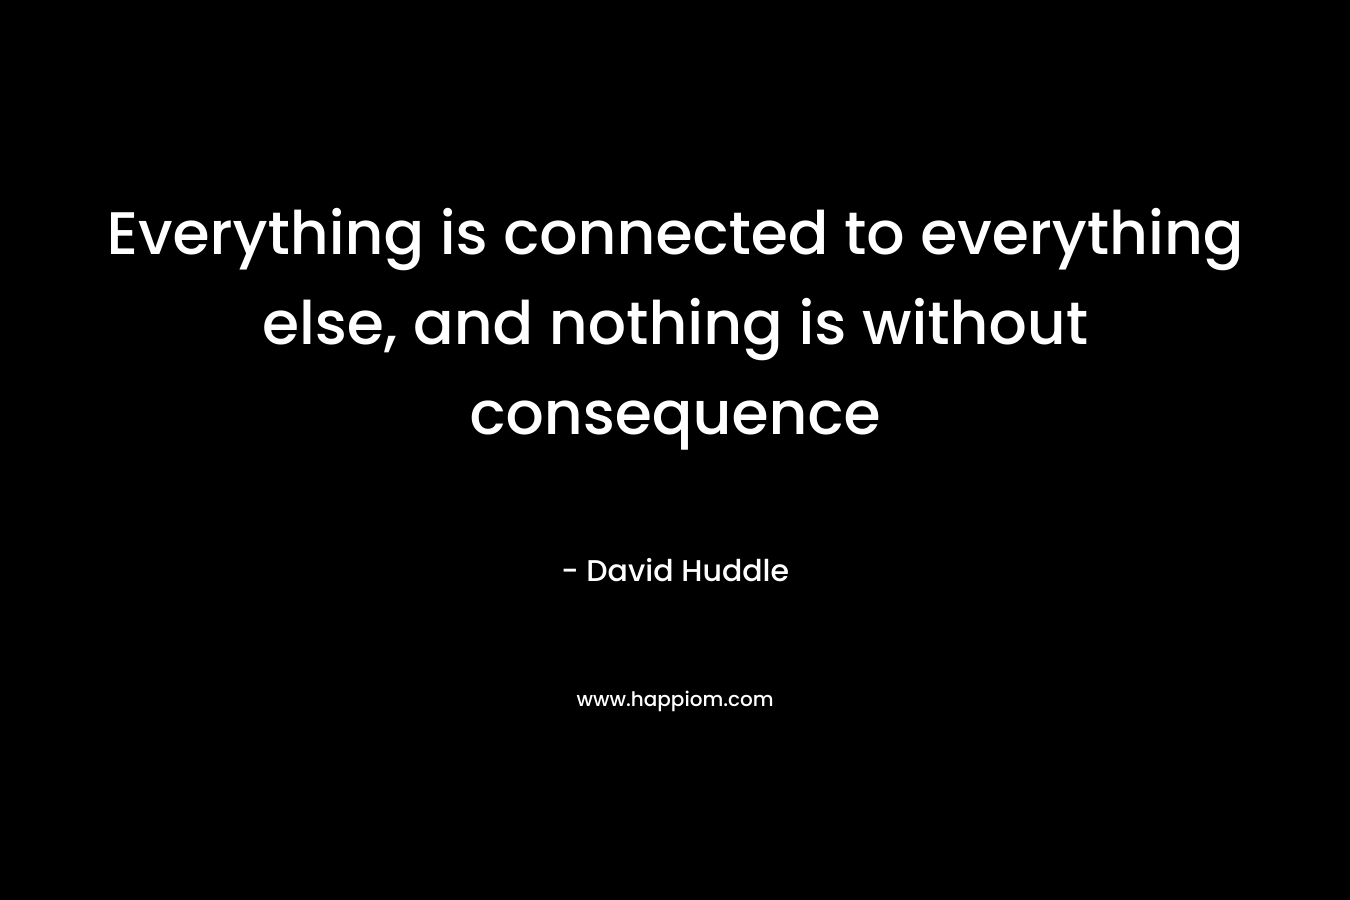 Everything is connected to everything else, and nothing is without consequence